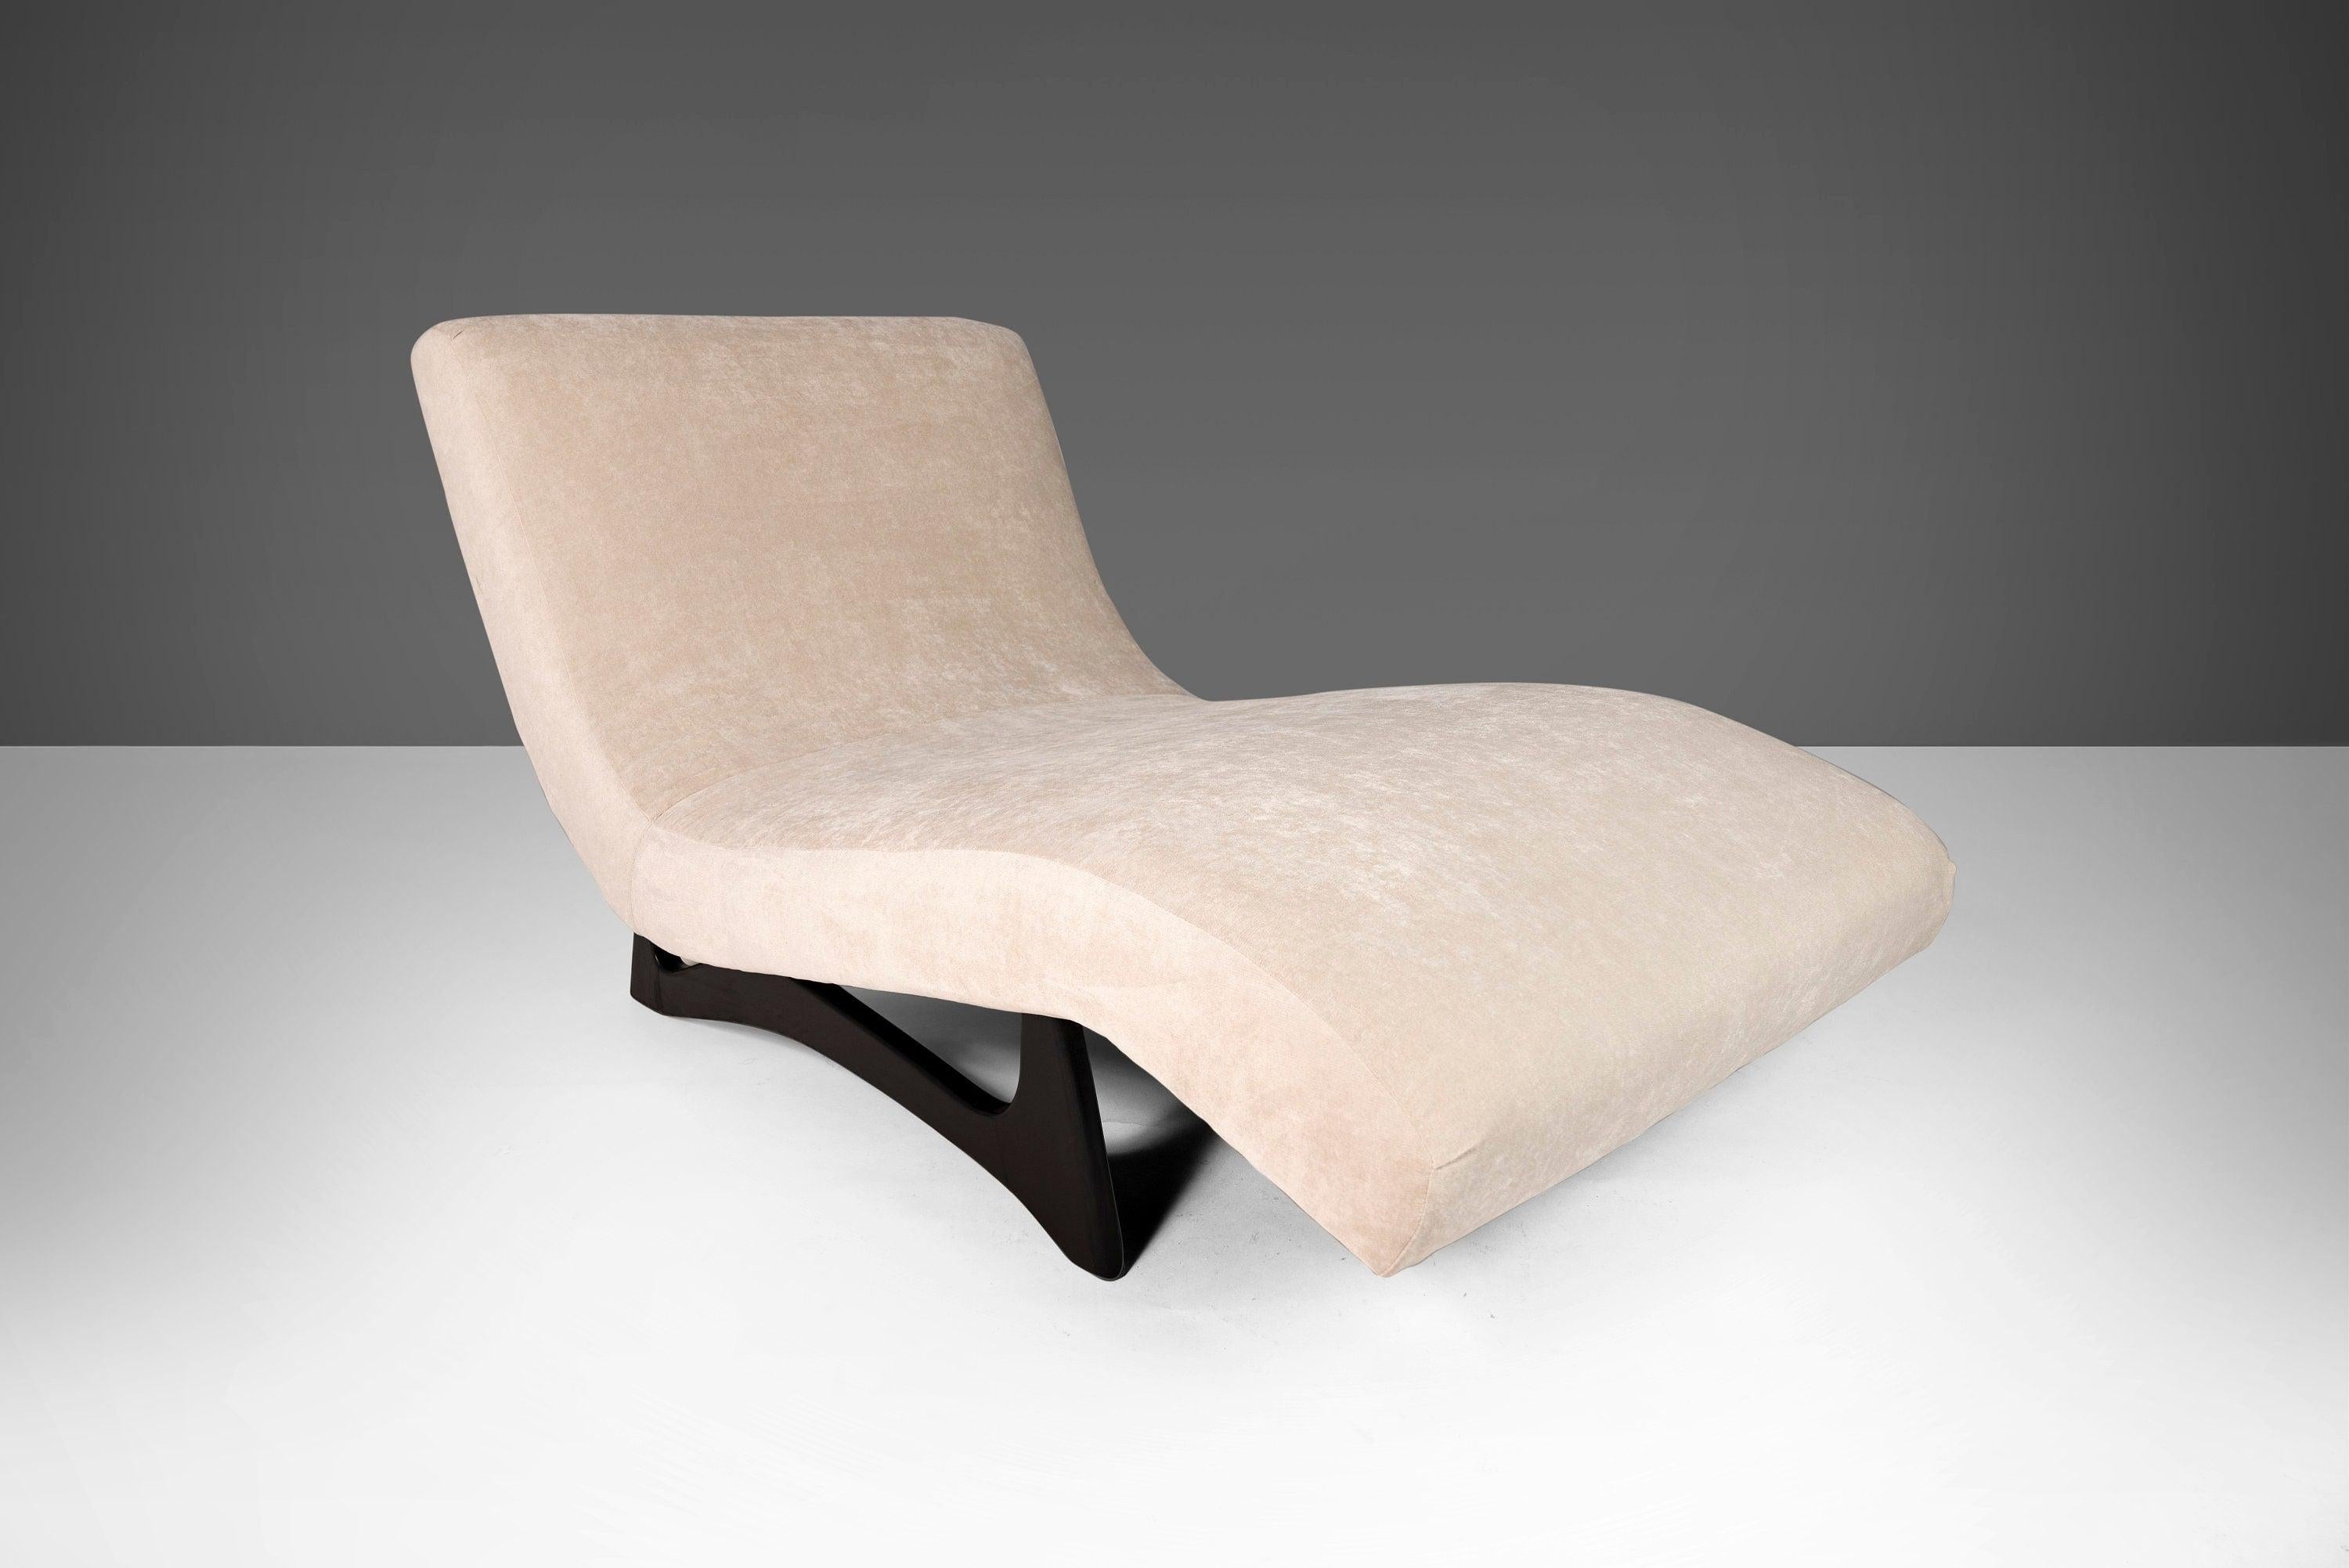 Mid-20th Century Sculptural Wave Lounge Chair Attributed to Adrian Pearsall for Craft Associates